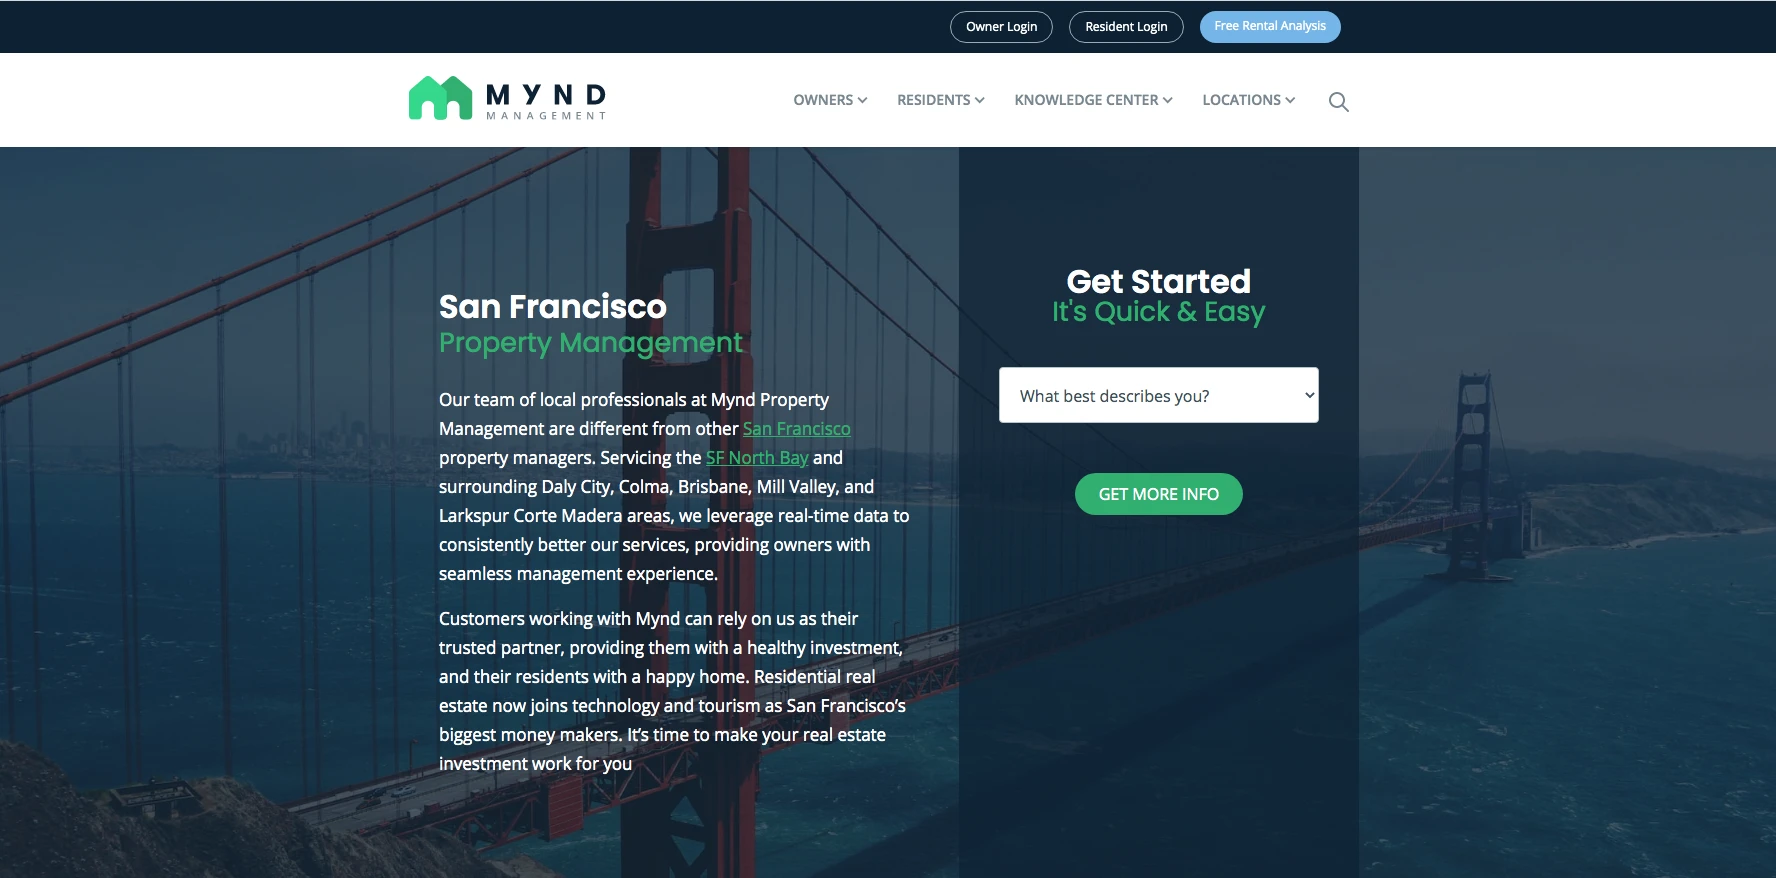 Mynd property management company in san francisco